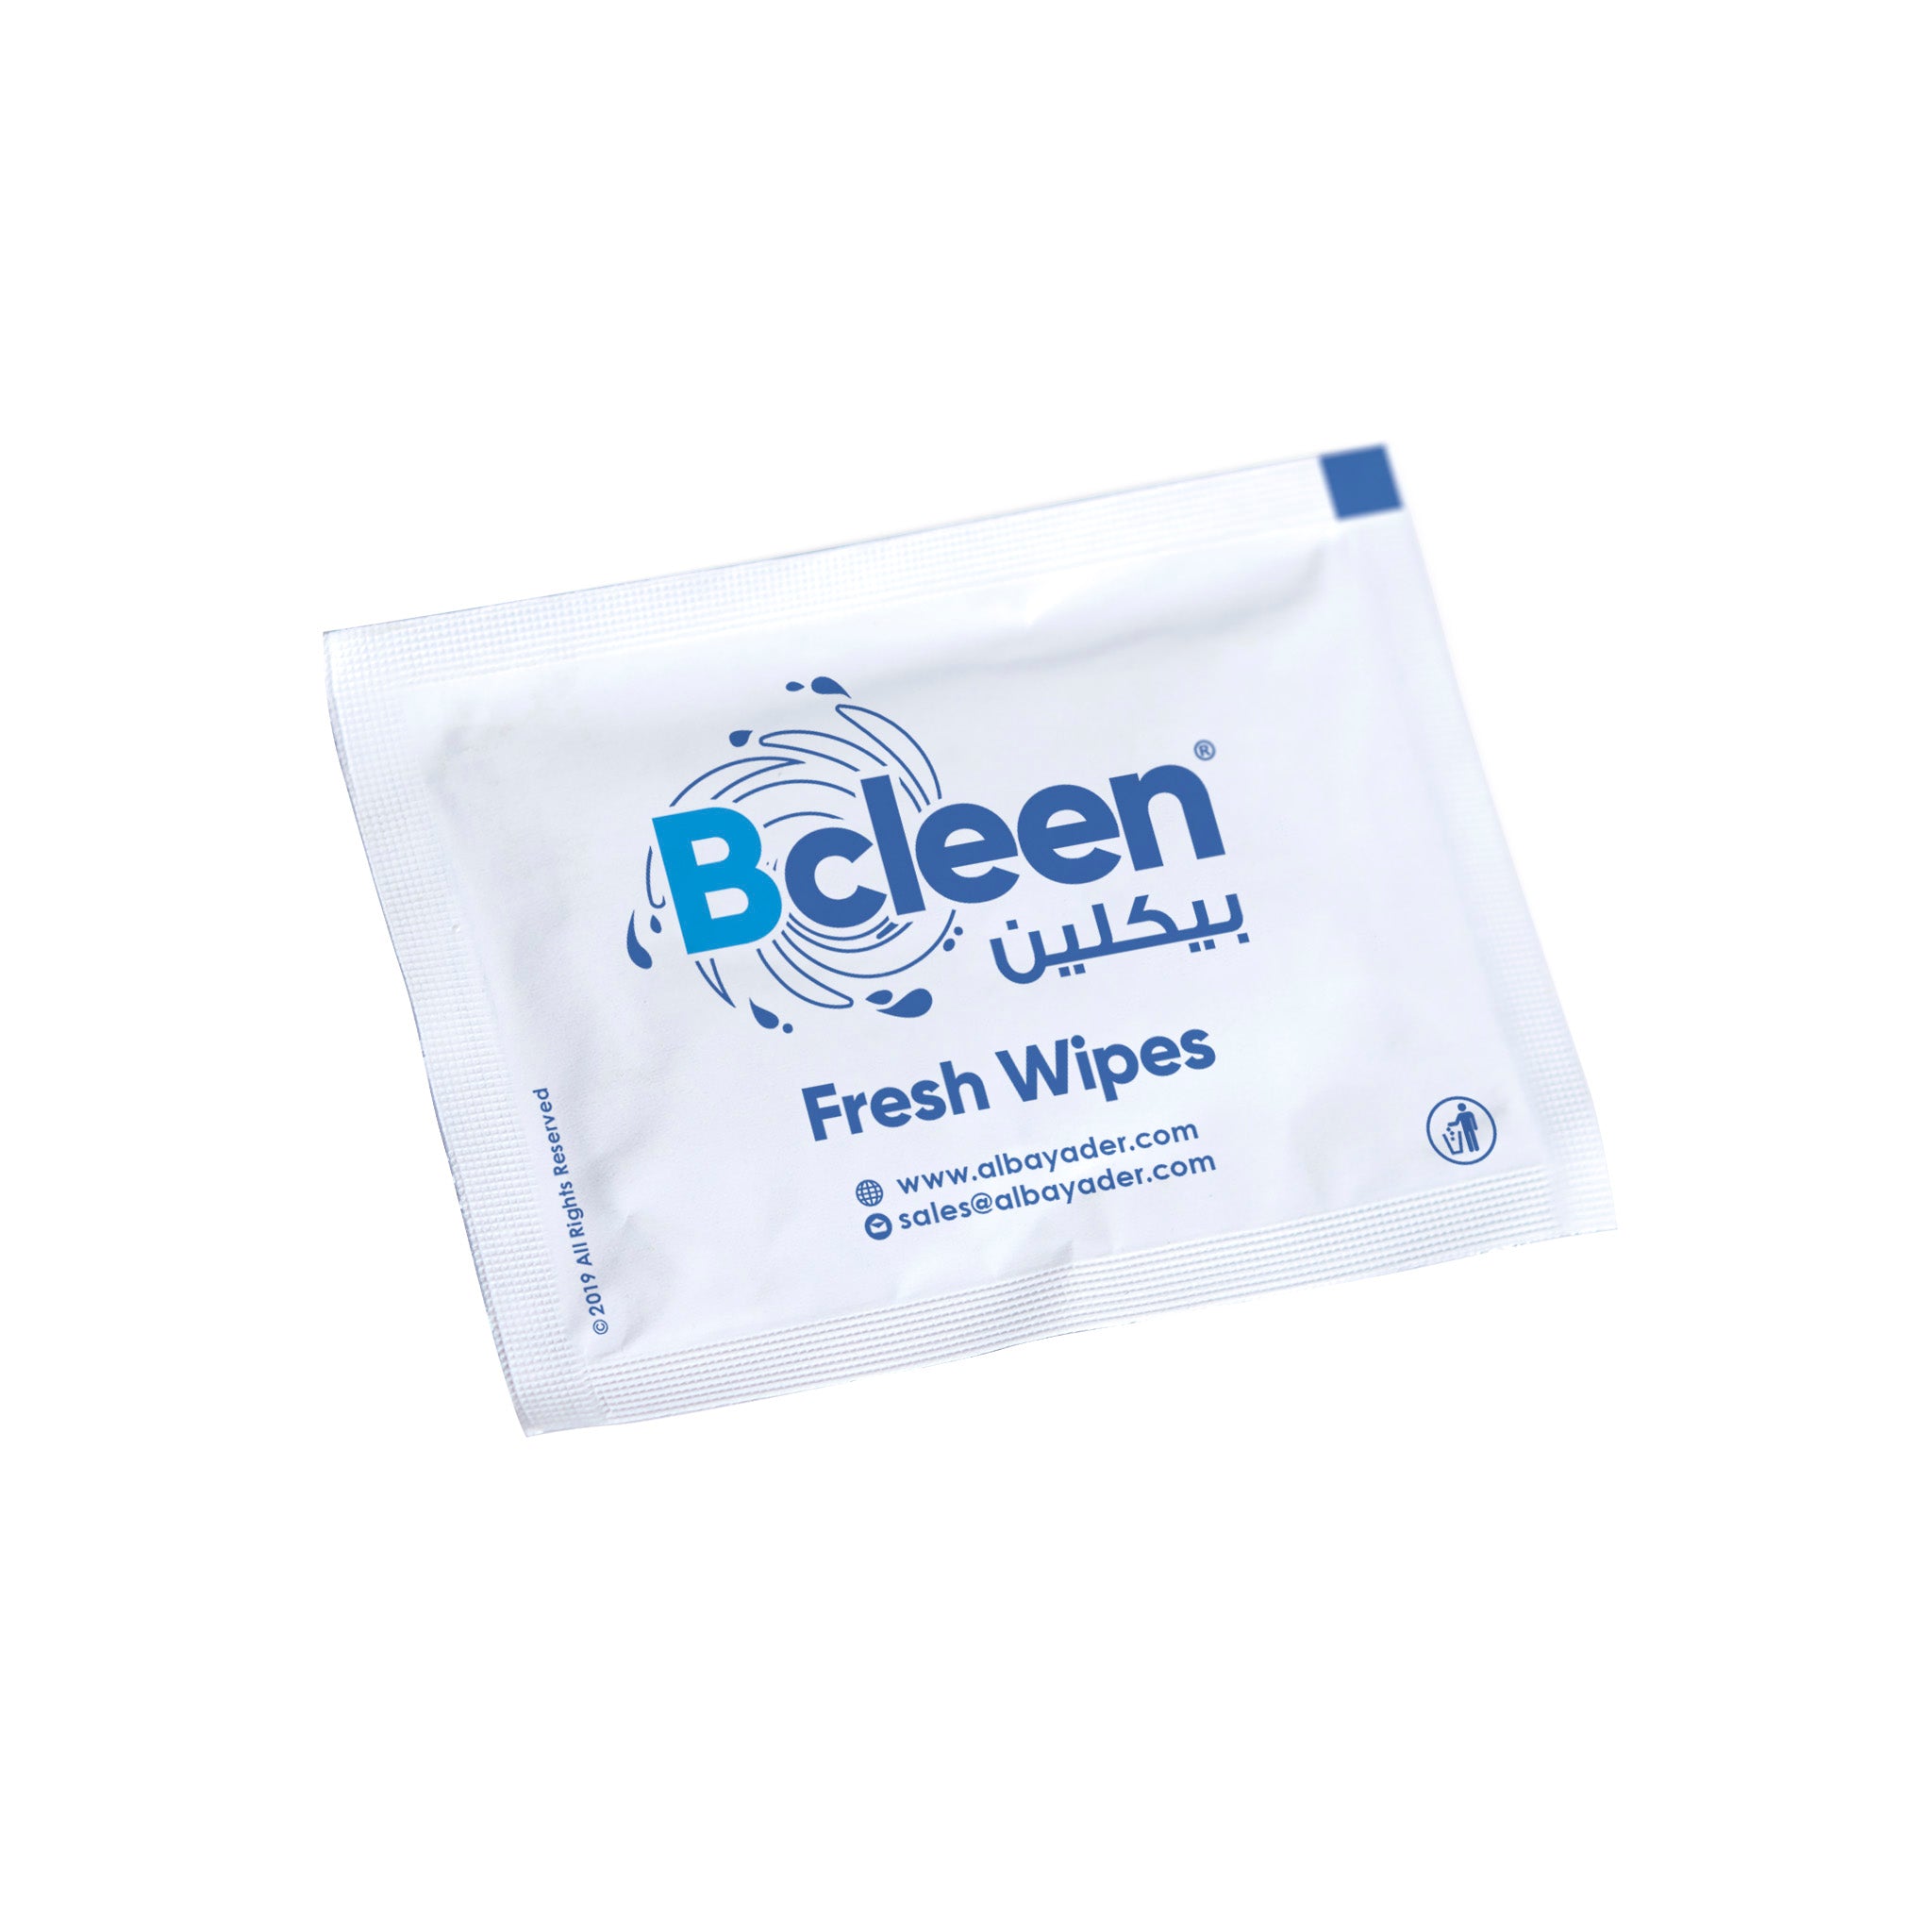 Bcleen® Fresh Wet Wipes 11x7 cms, Large - Pack of 25 offer